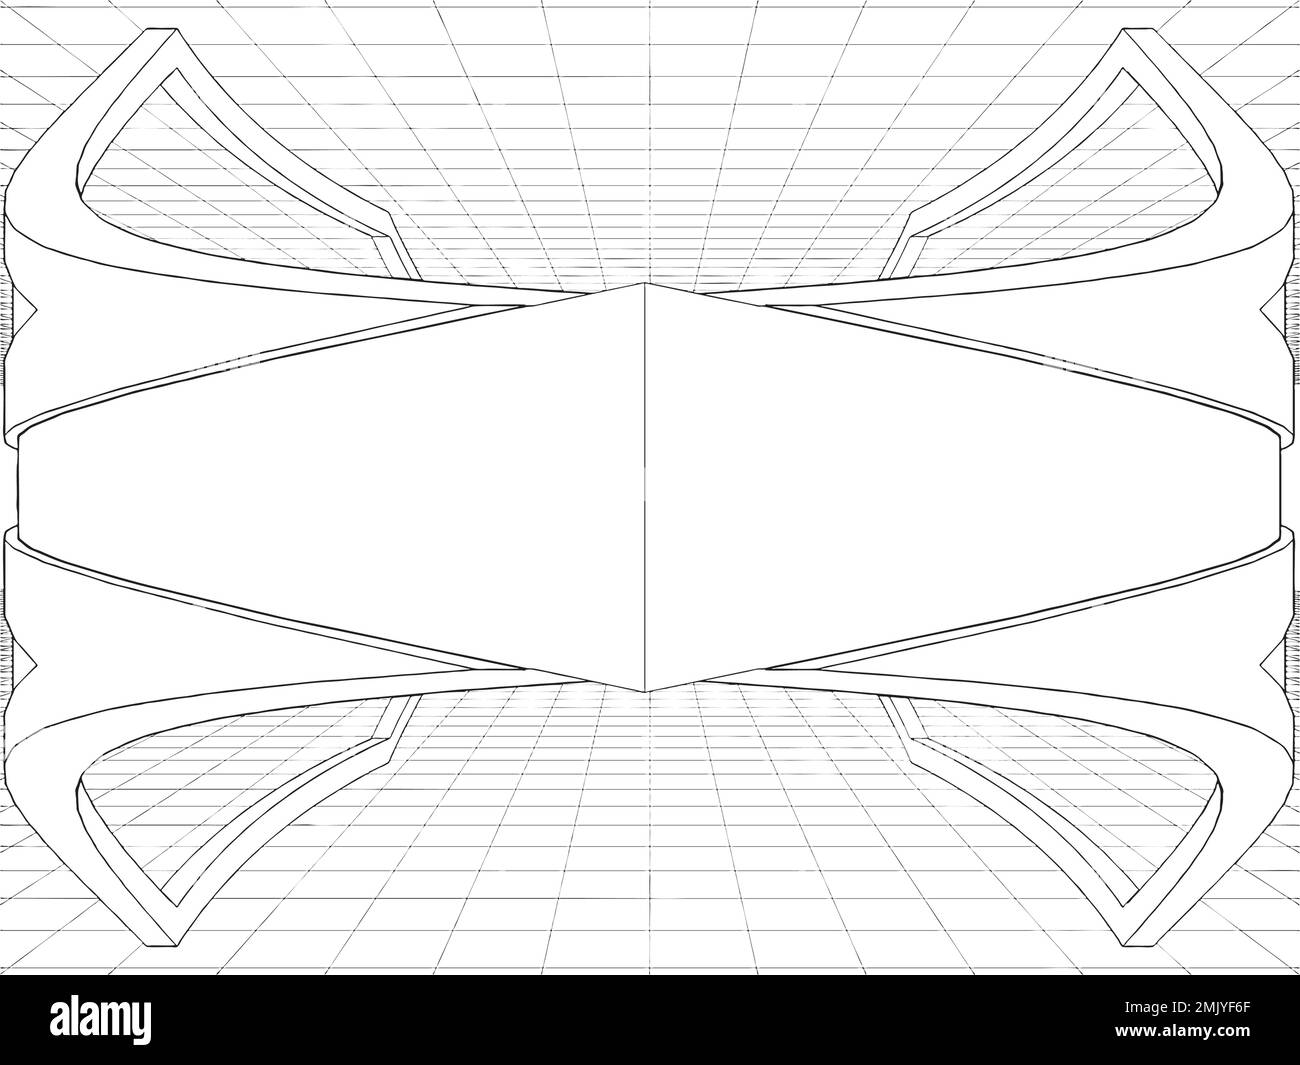 Abstract Construction Structure Vector. Illustration Isolated On White Background. A Vector Illustration Of Construction. Stock Vector